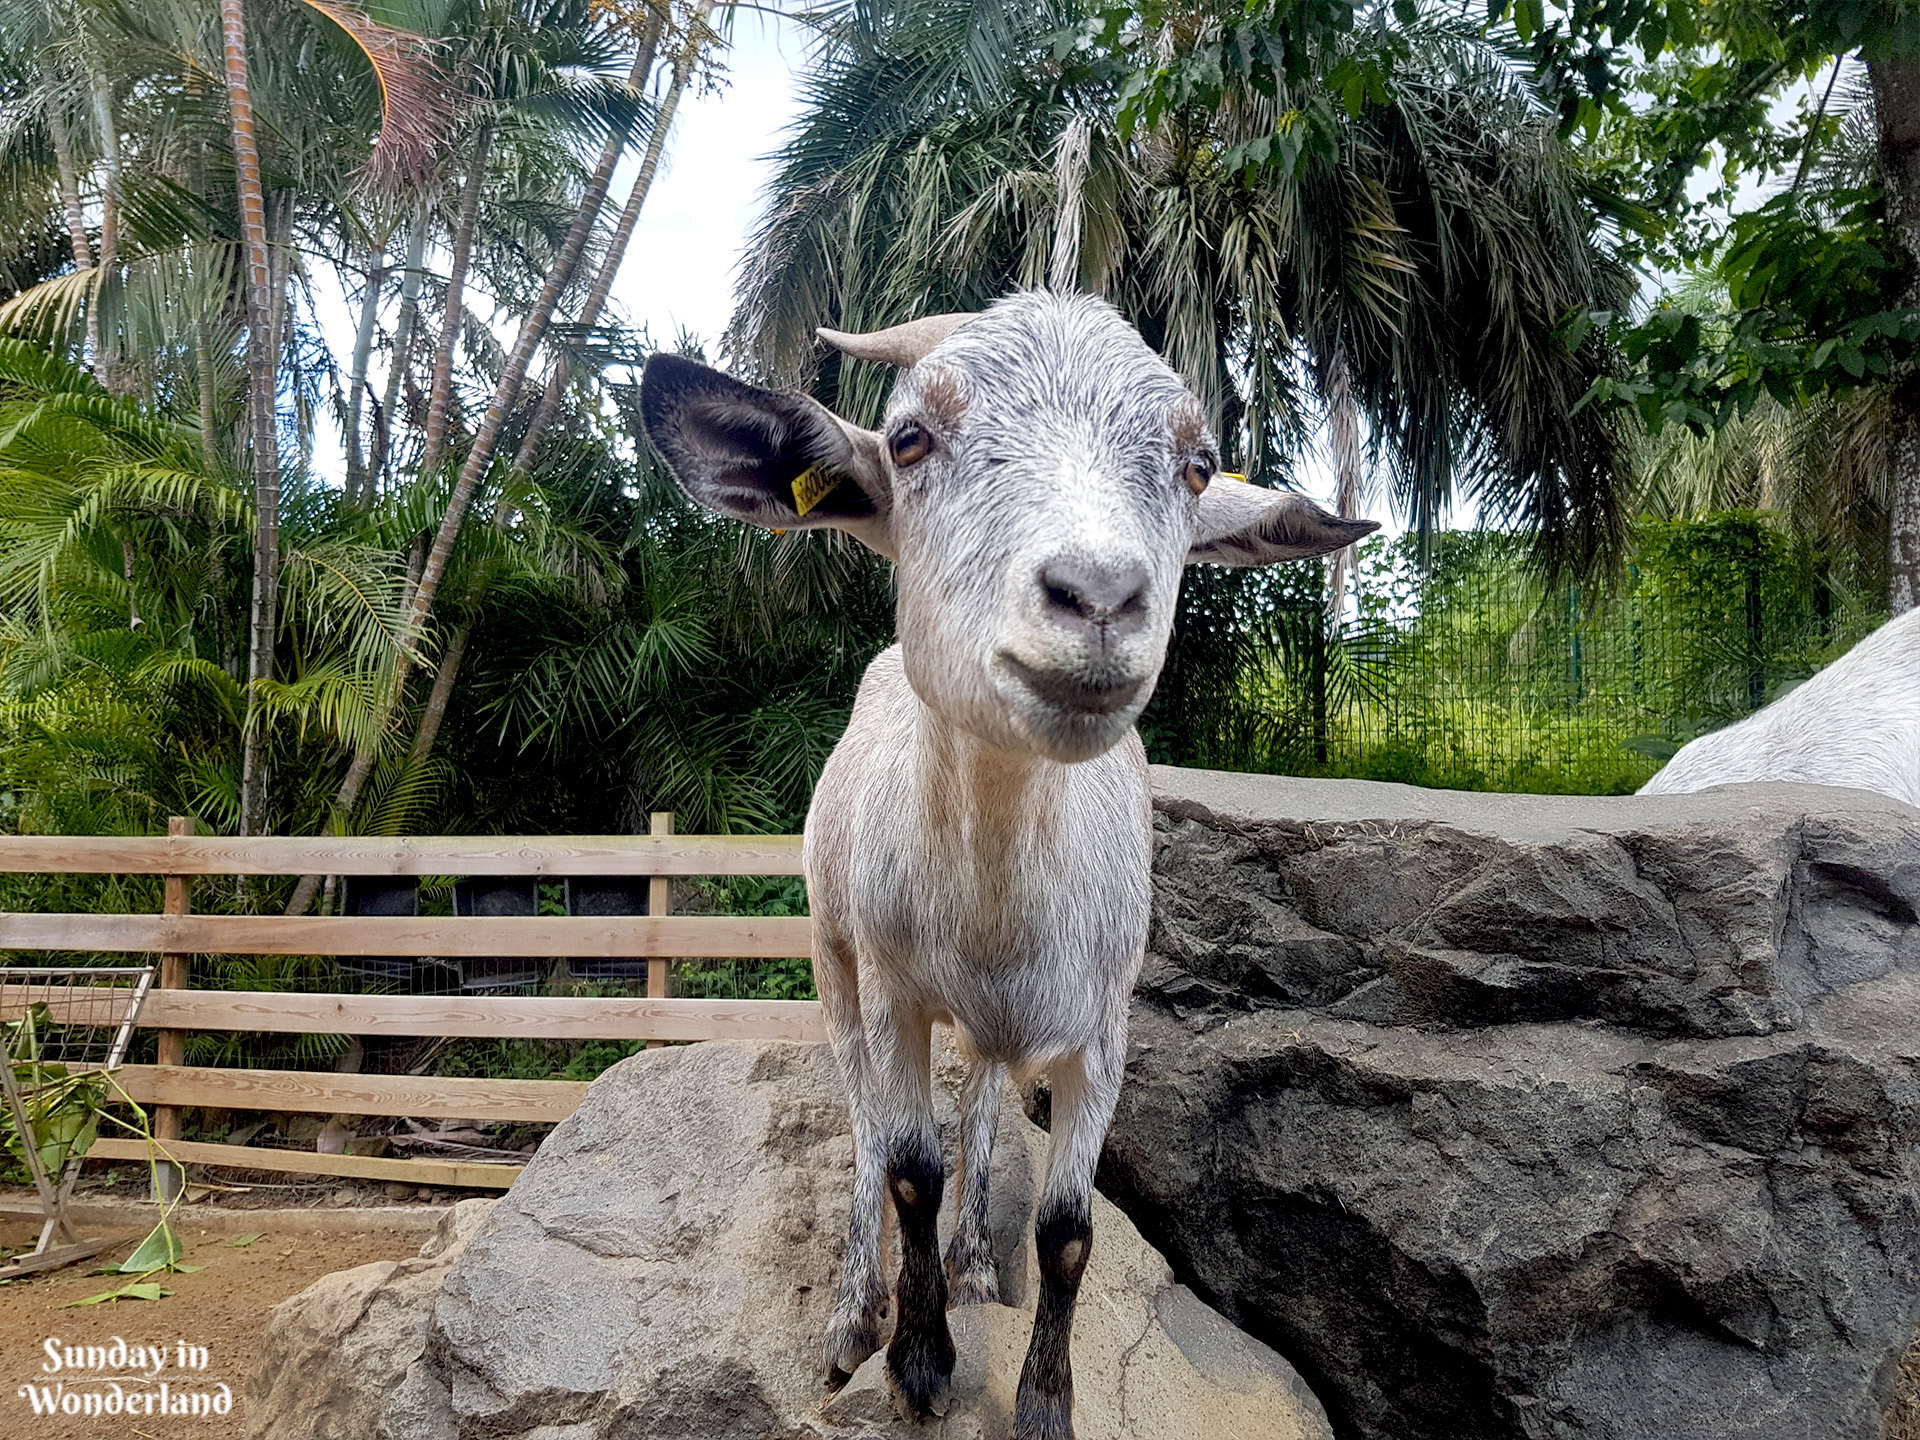 A cute grey goat in Botanical Garden in Deshaies in Guadeloupe - Sunday in Wonderland Blog